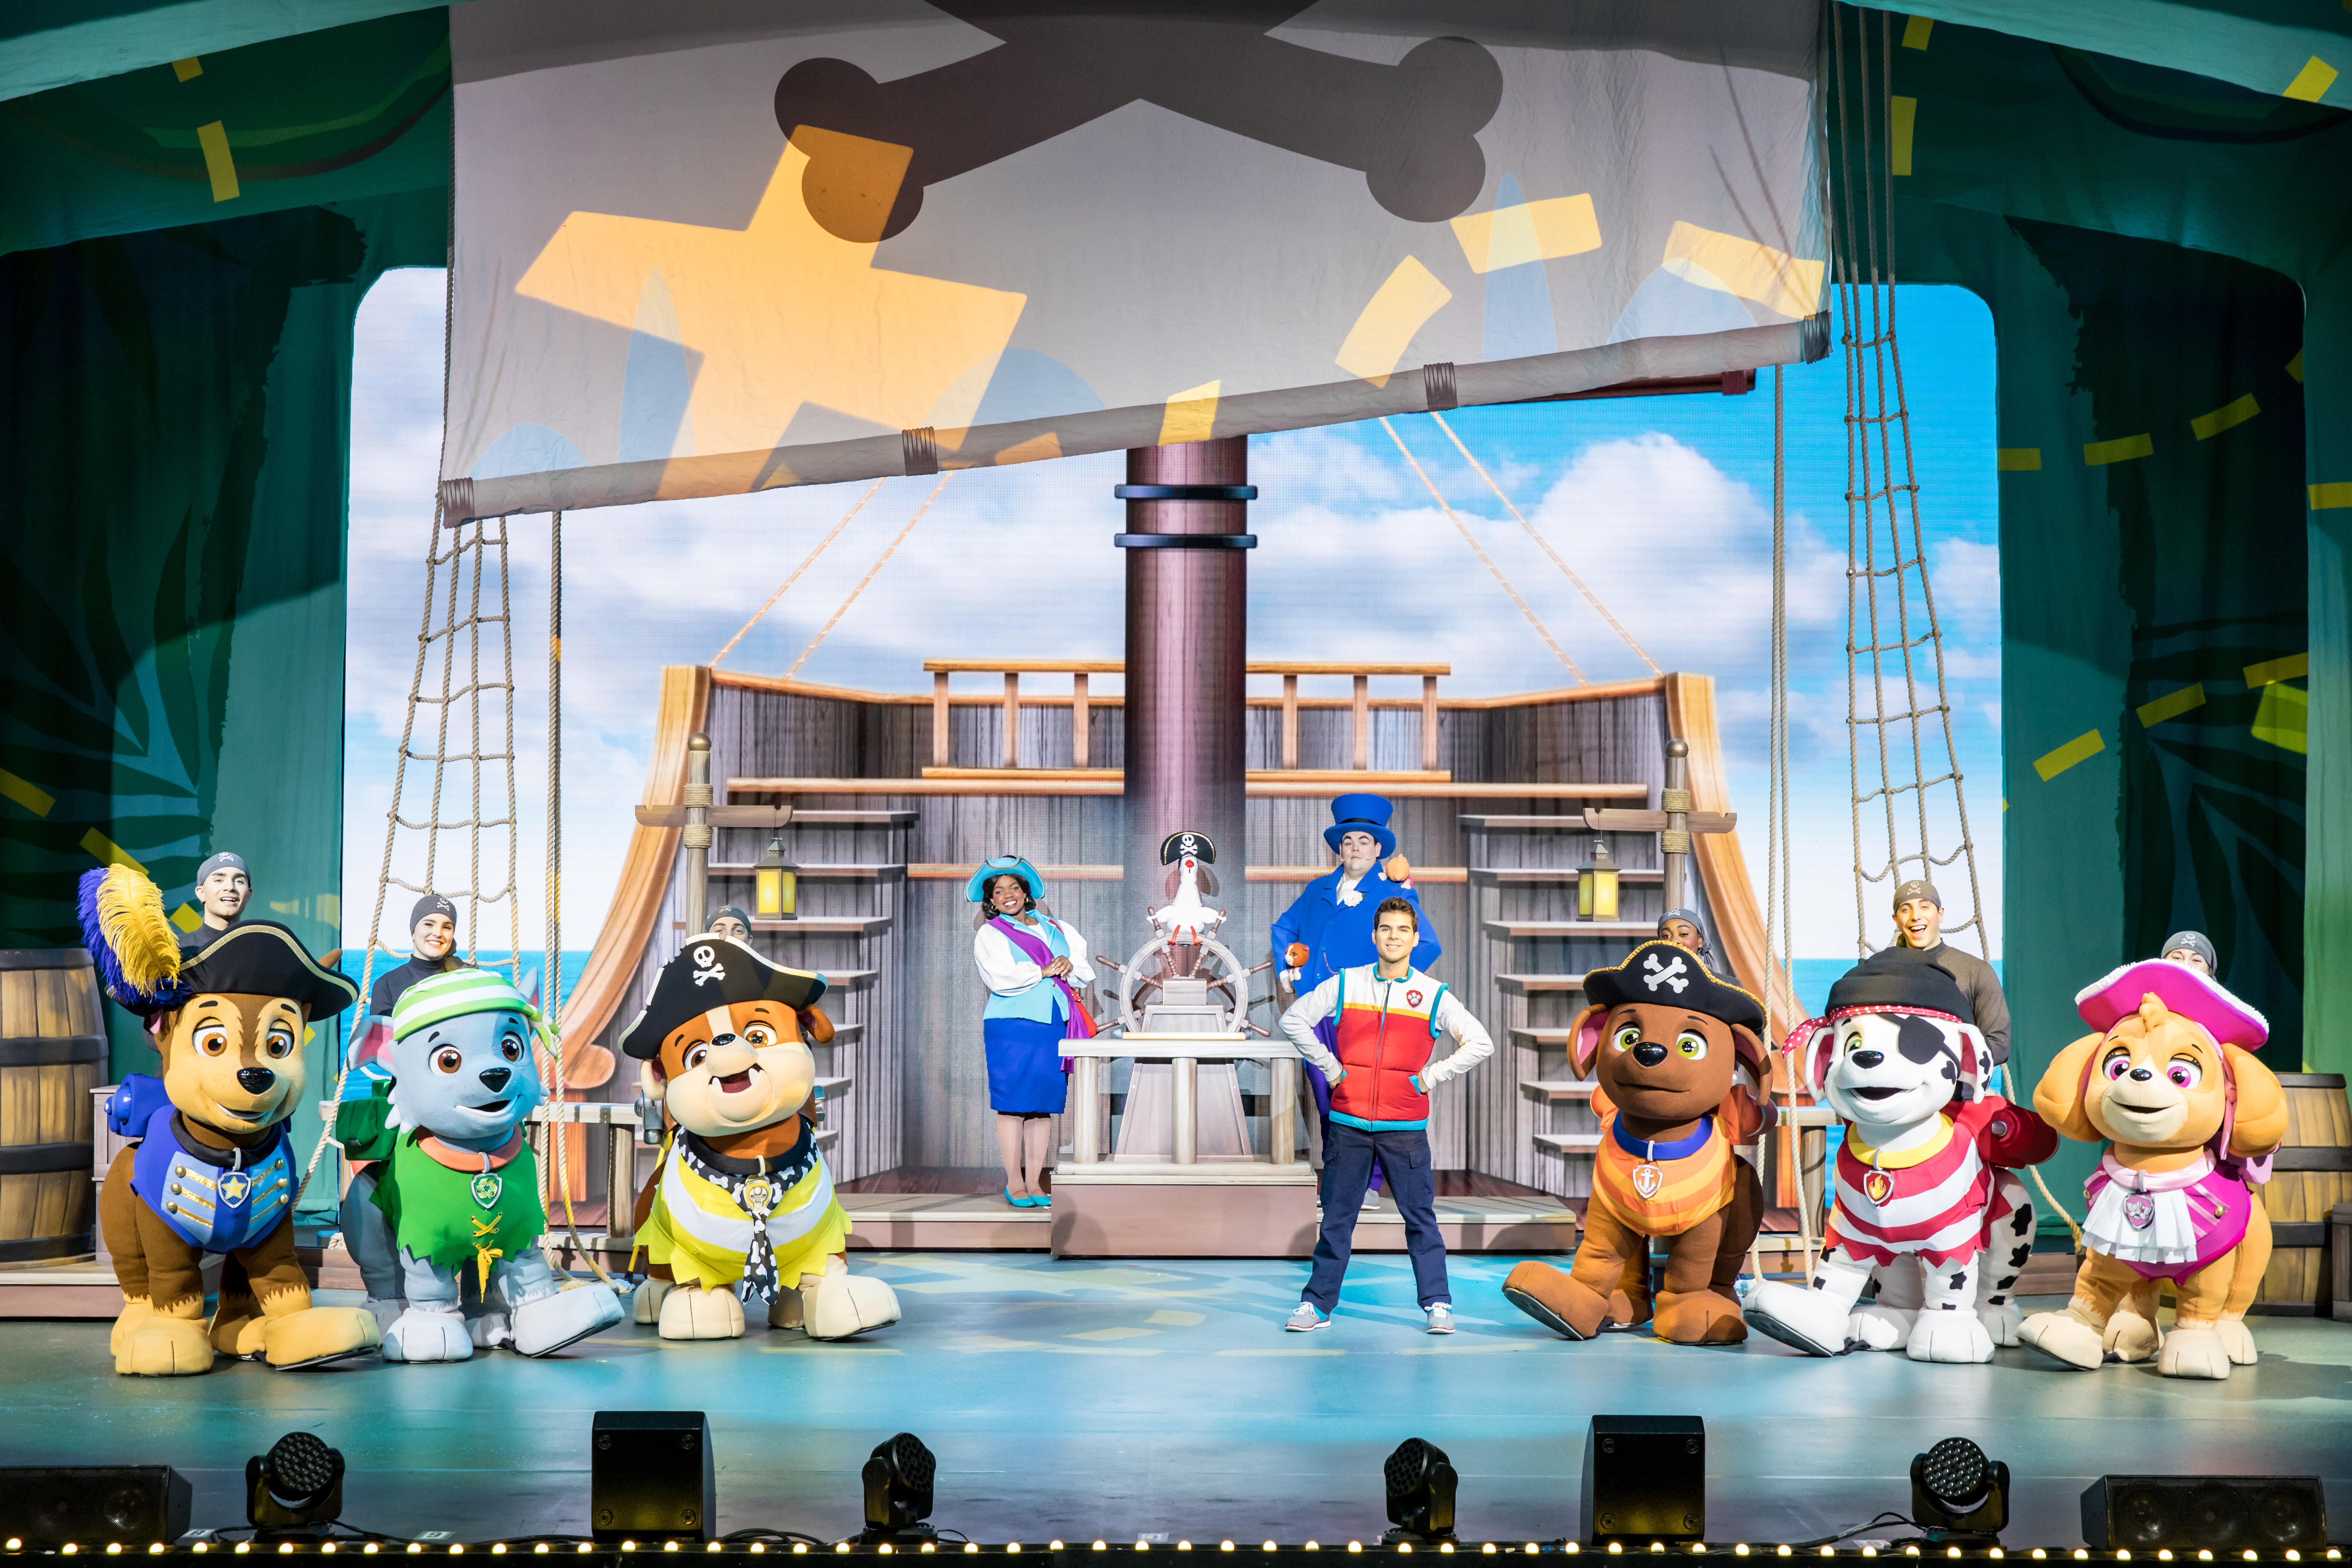 PAW Patrol Live! “The Great Pirate Adventure” in Toronto! (Giveaway)